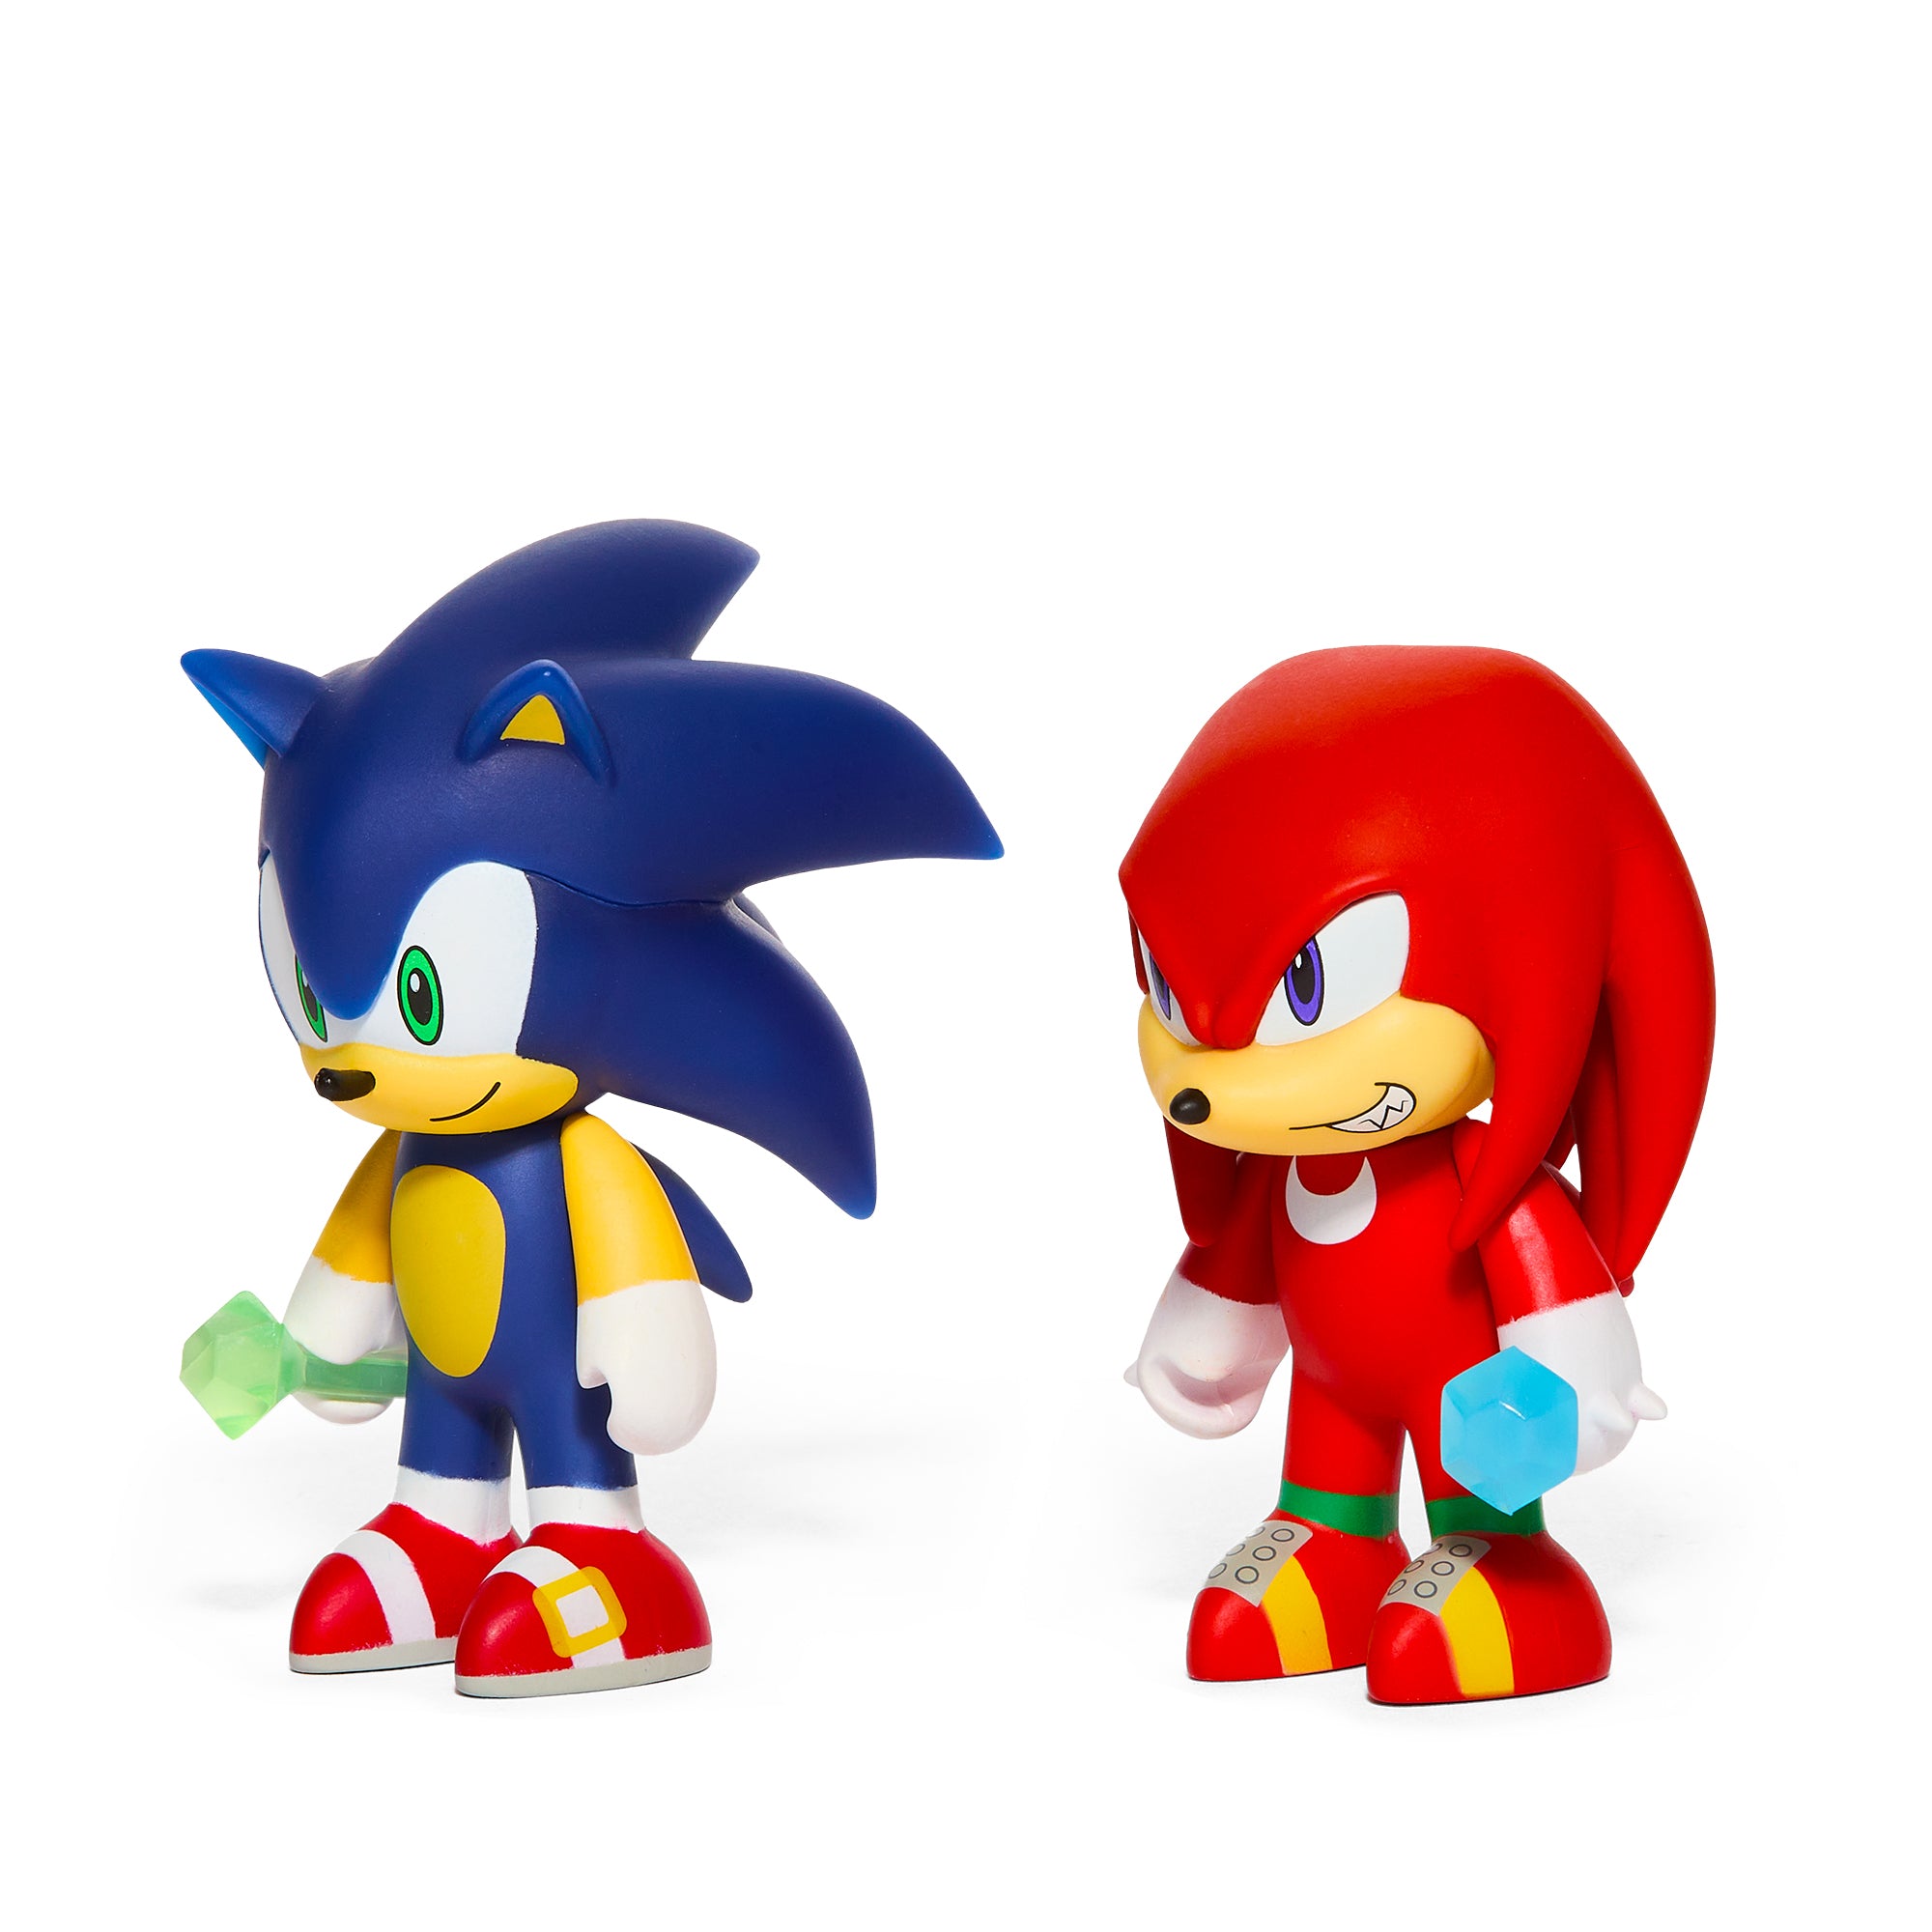 2023 CON EXCLUSIVE: Sonic the Hedgehog 1.5 Premium Pin 3-Pack